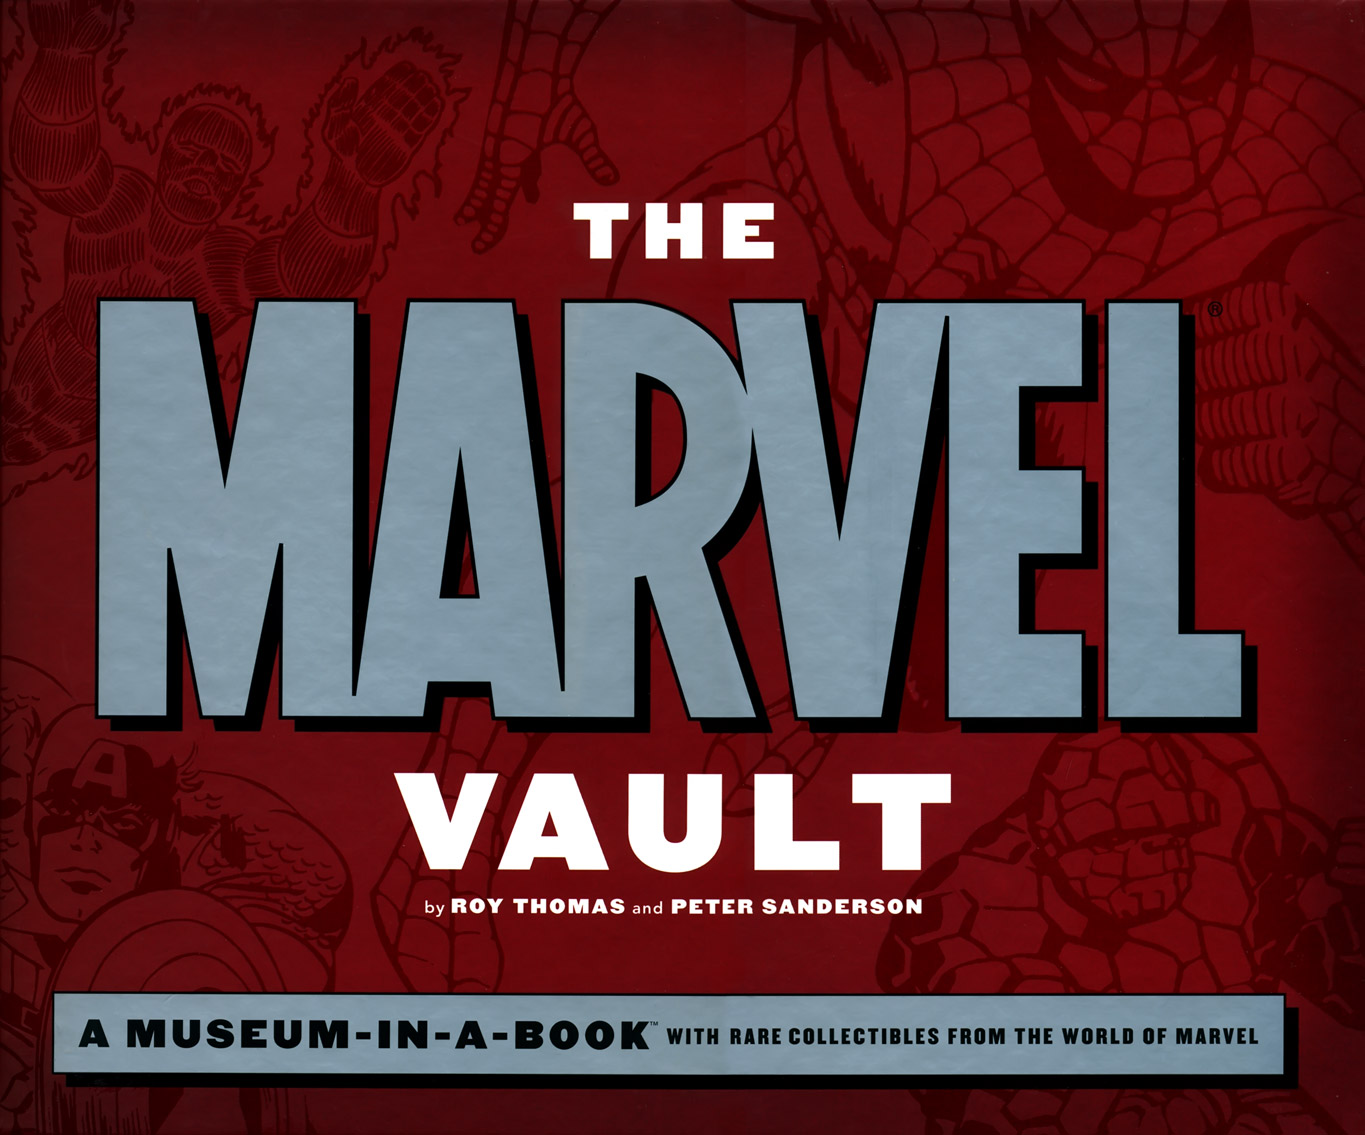 Read online The Marvel Vault comic -  Issue # TPB - 2